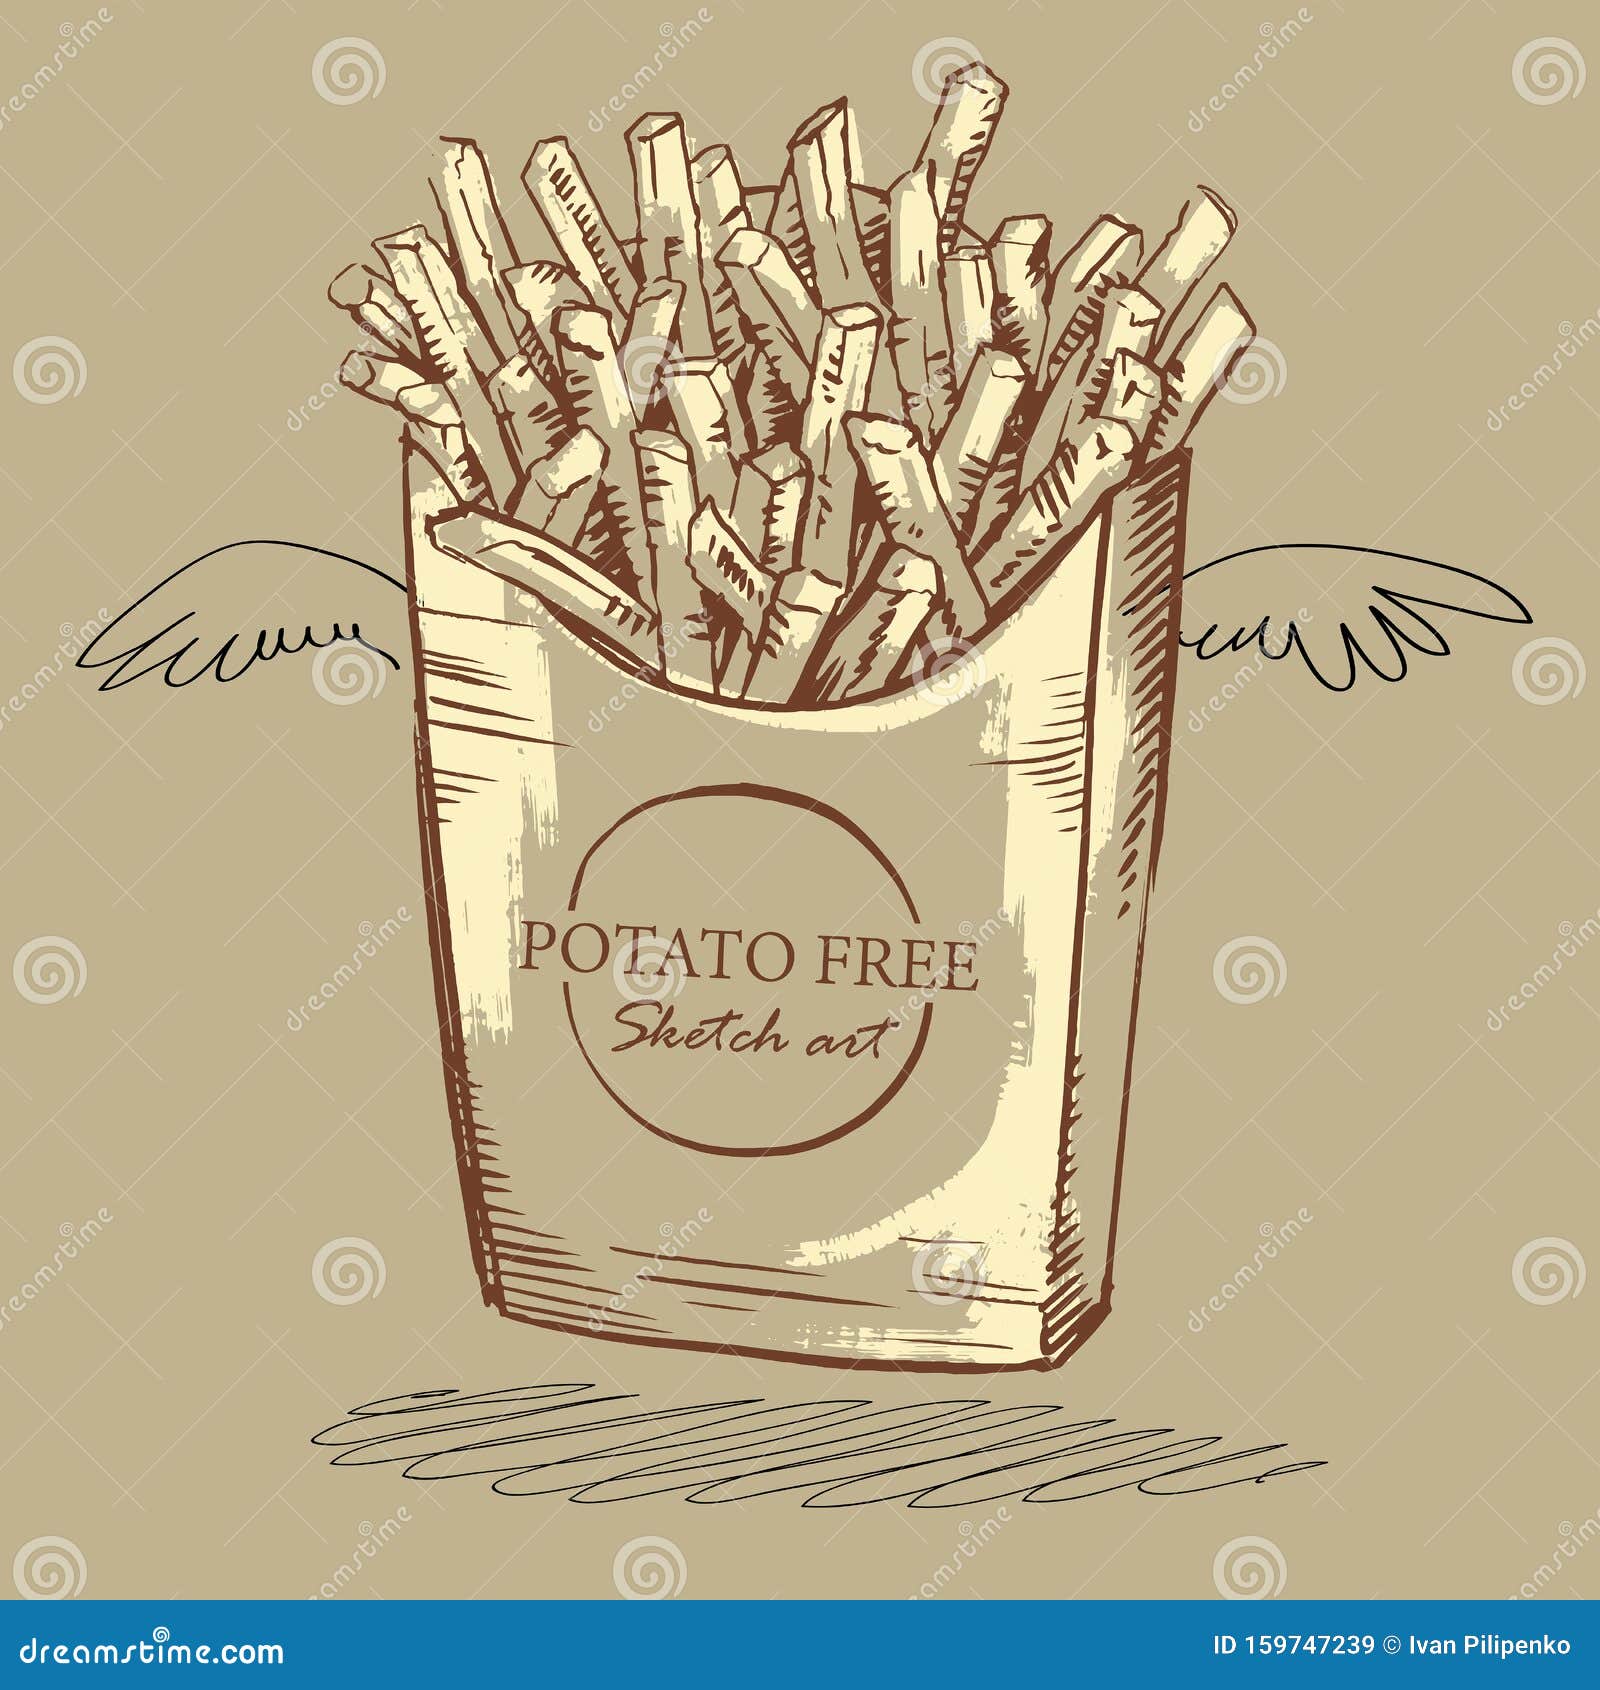 Vector Sketch Of Crushed Packet Of Milk Ond A Splent Bullet Royalty Free  SVG, Cliparts, Vectors, And Stock Illustration. Image 143156782.